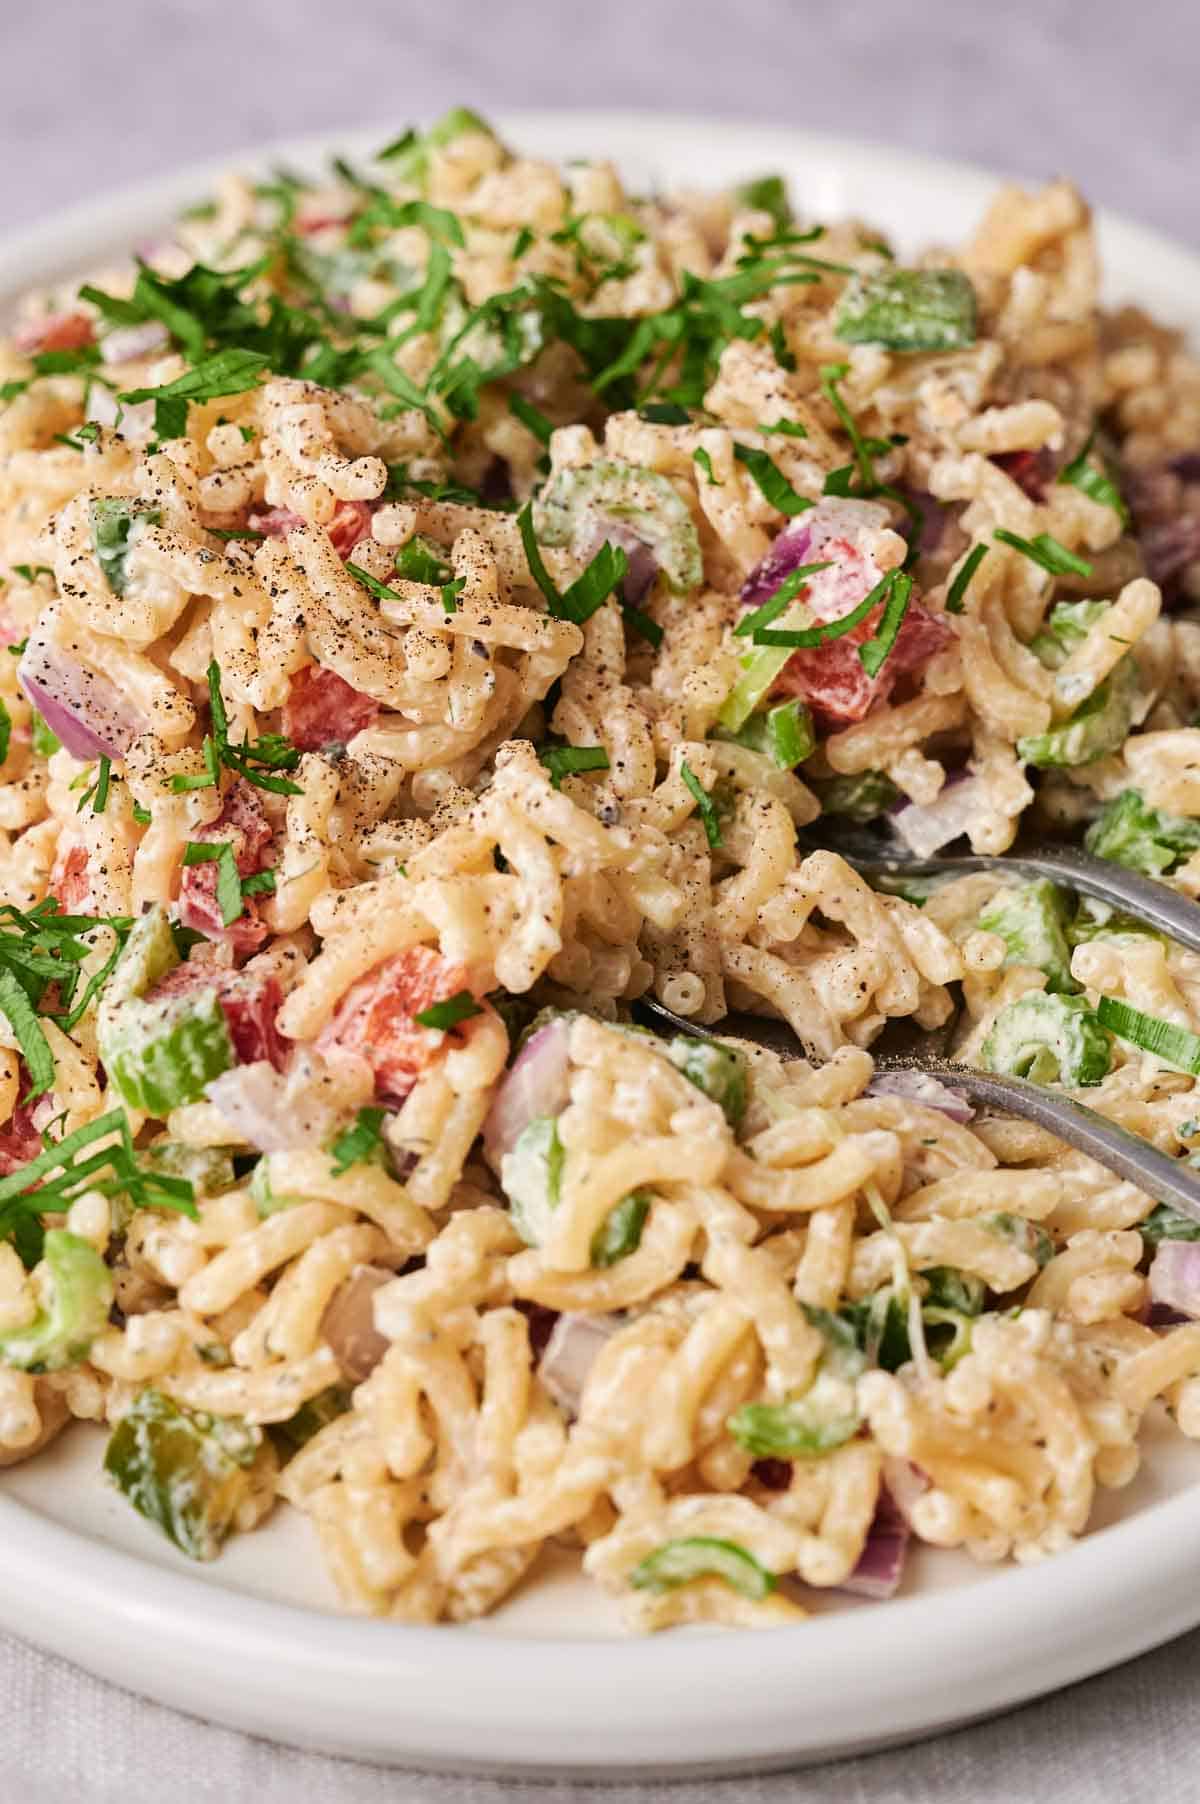 A plate of creamy macaroni salad with diced tomatoes, chopped parsley, and onions, seasoned with black pepper, served with a fork.